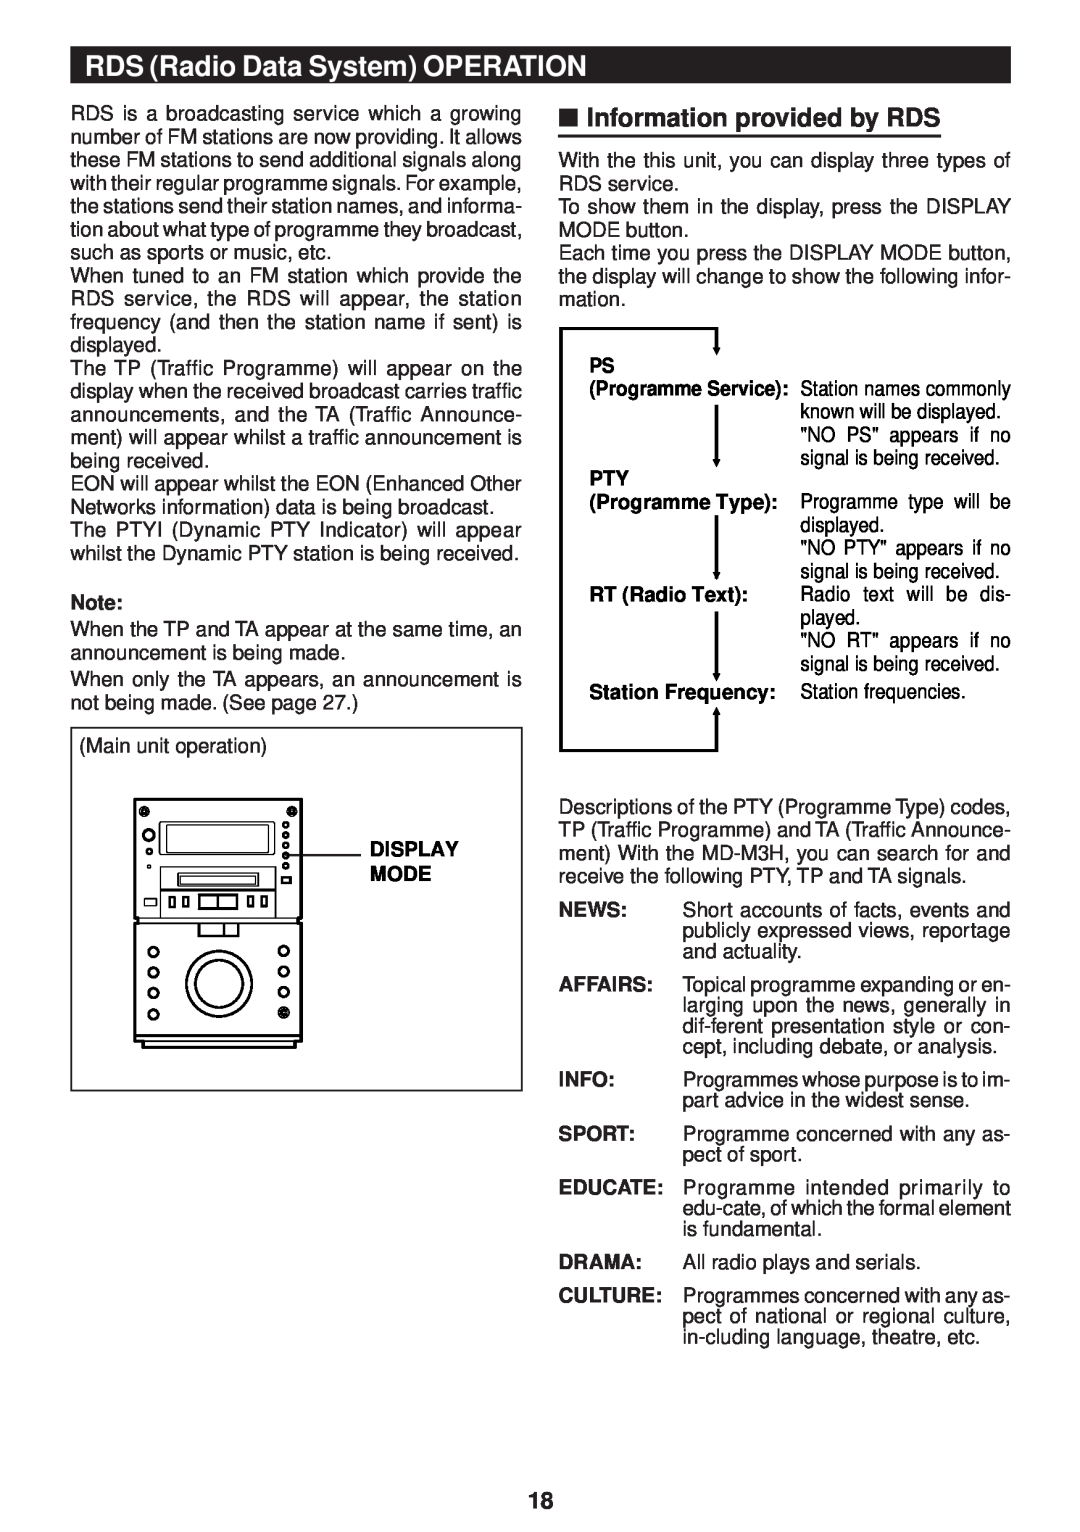 Sharp MD-M3H operation manual RDS Radio Data System OPERATION, Information provided by RDS 